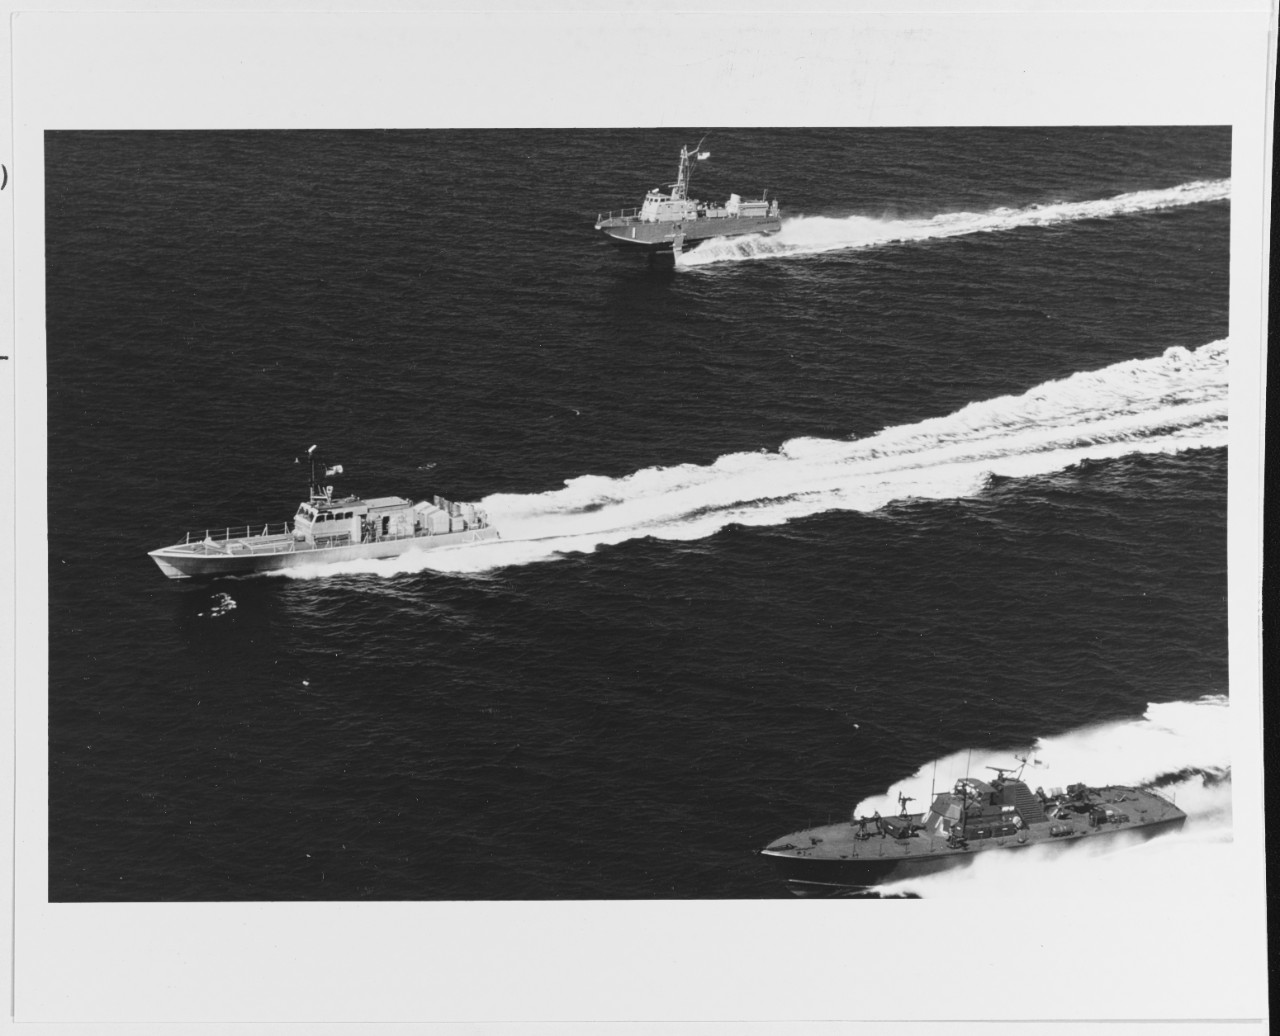 Fast Patrol Boat, CPIC-X, and USS FLAGSTAFF (PGH-1) in high speed formation